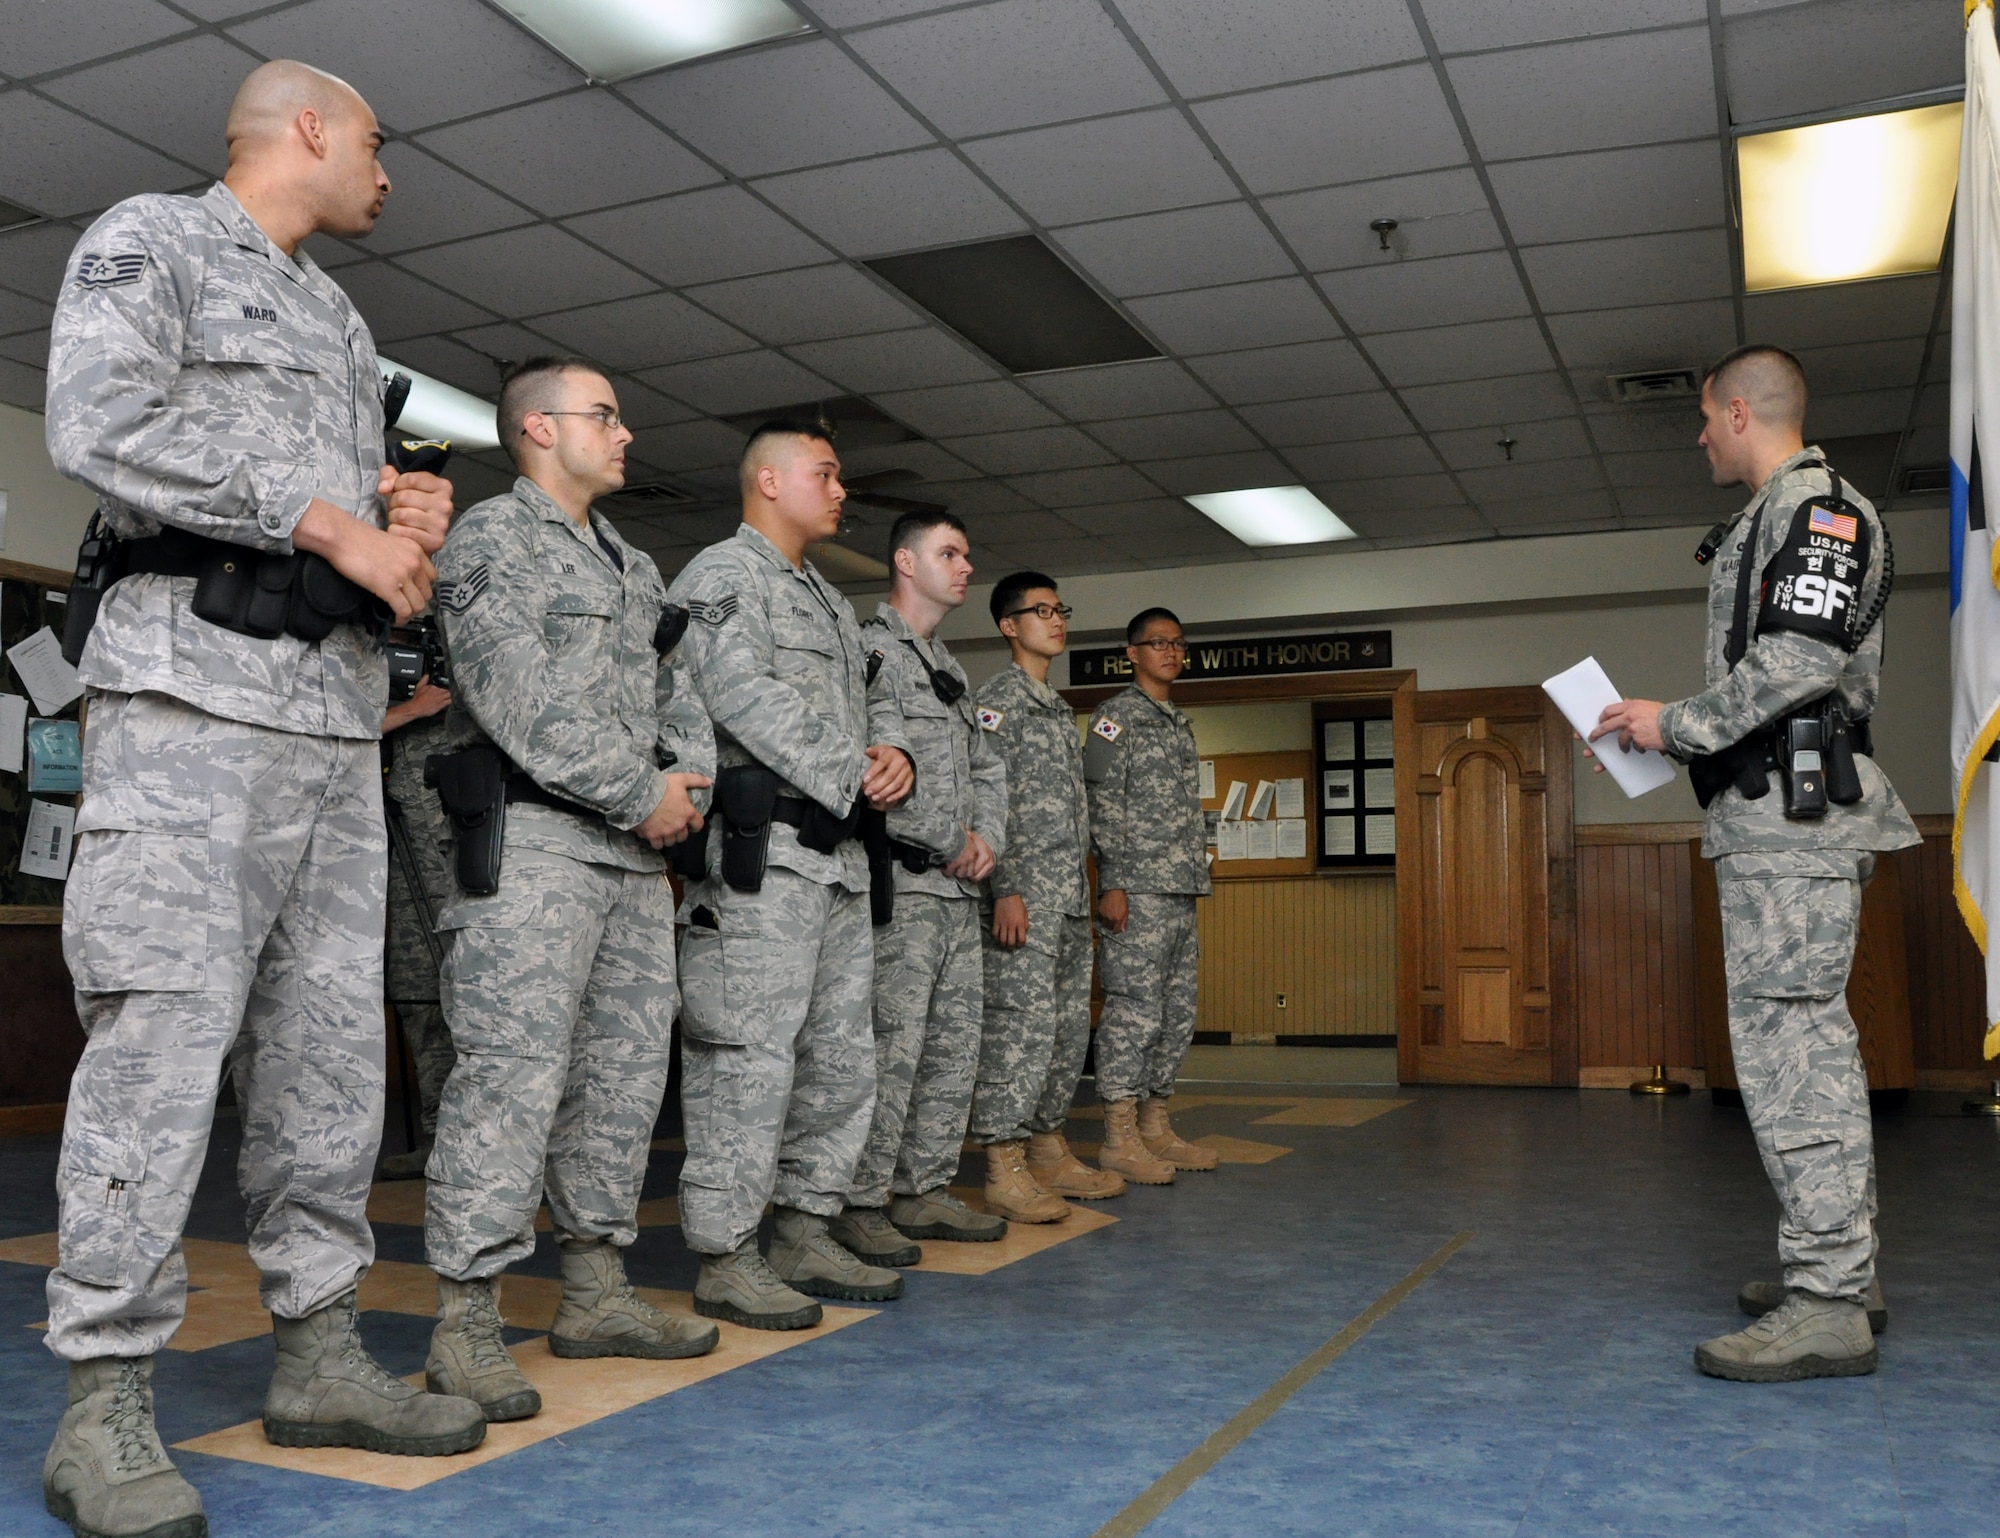 Master Sgt. Sloan Kalina, 51st Security Forces Squadron town patrolman, briefs security forces Airmen and Republic of Korea Army soldiers before a town patrol shift in Songtan, July 12, 2012. Town patrol routinely monitors areas just outside of Osan Air Base for force protection and enforcement of U.S. Forces Korea directives and regulations for people subject to the status of forces agreement and Uniform Code of Military Justice. The Korean Augmentees to the U.S. Army will help with language barriers and highlight the partnership between the U.S. military and Korean authorities. (U.S. Air Force photo/Senior Airman Michael Battles)